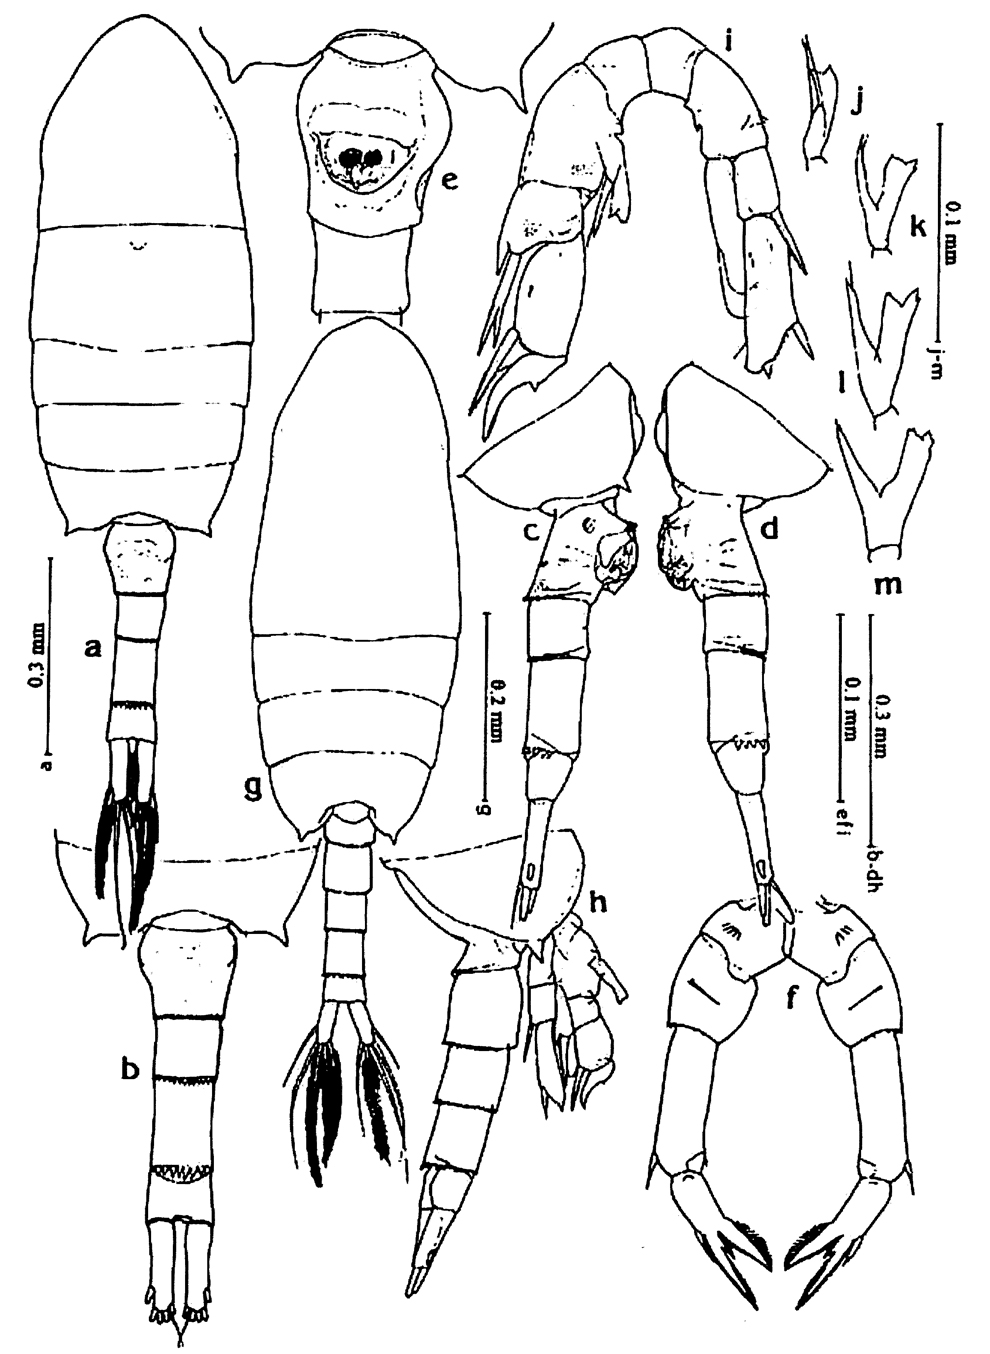 Species Pseudodiaptomus philippinensis - Plate 2 of morphological figures